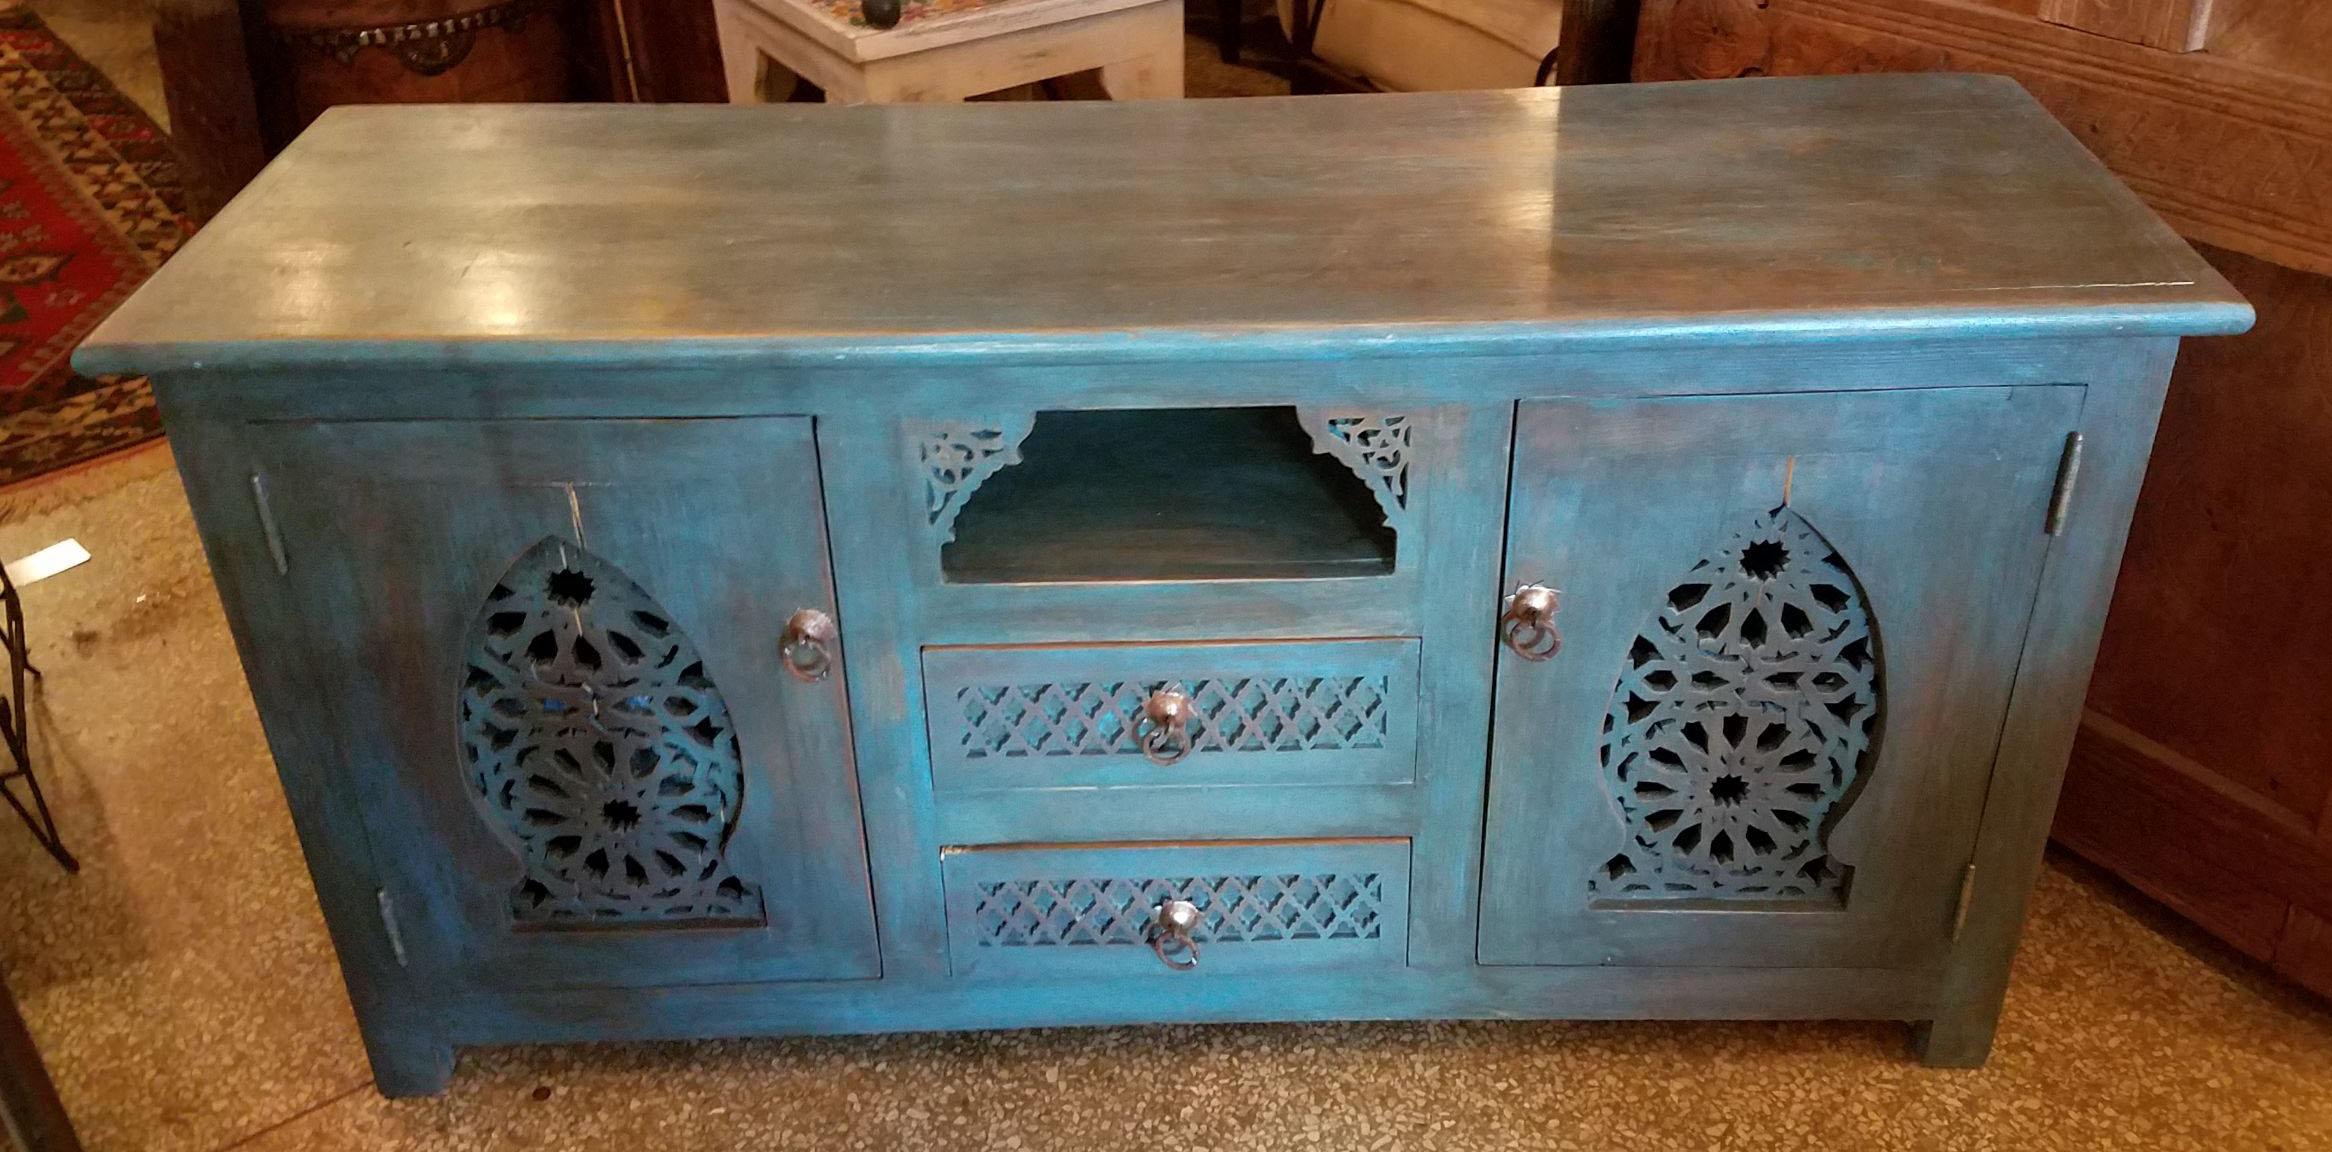 One of the few Moroccan media stands we currently have in stock. This one is a very solid Cedar wood TV cabinet, with lots of storage space, and can be used as a TV stand, aquarium support base, blanket chest, or just stand alone as a show piece.